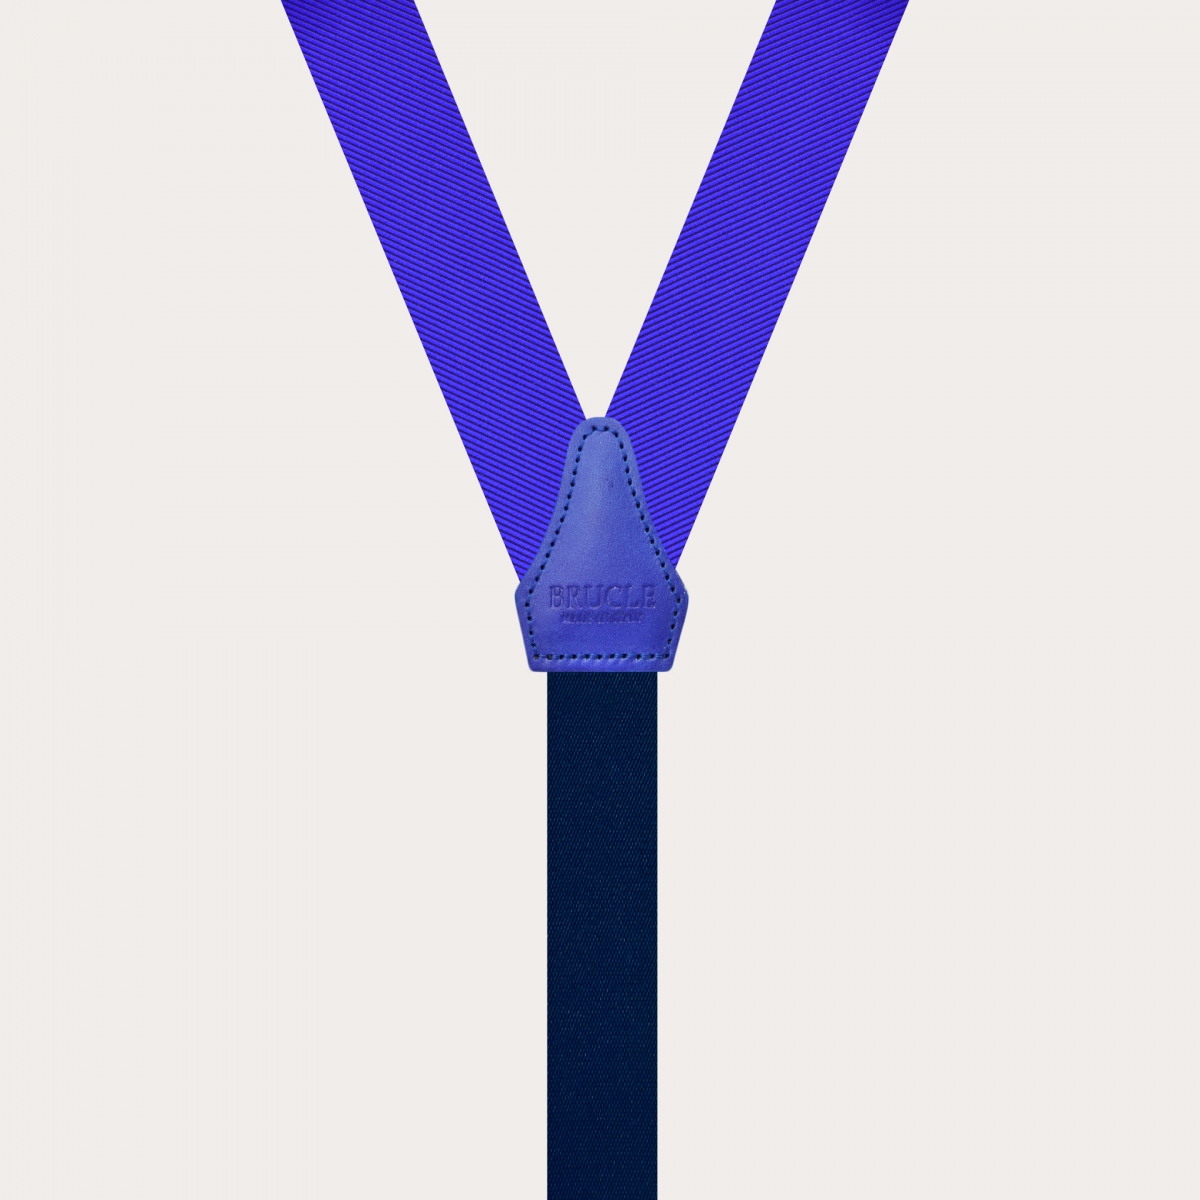 Narrow royal blue silk suspenders with button loops